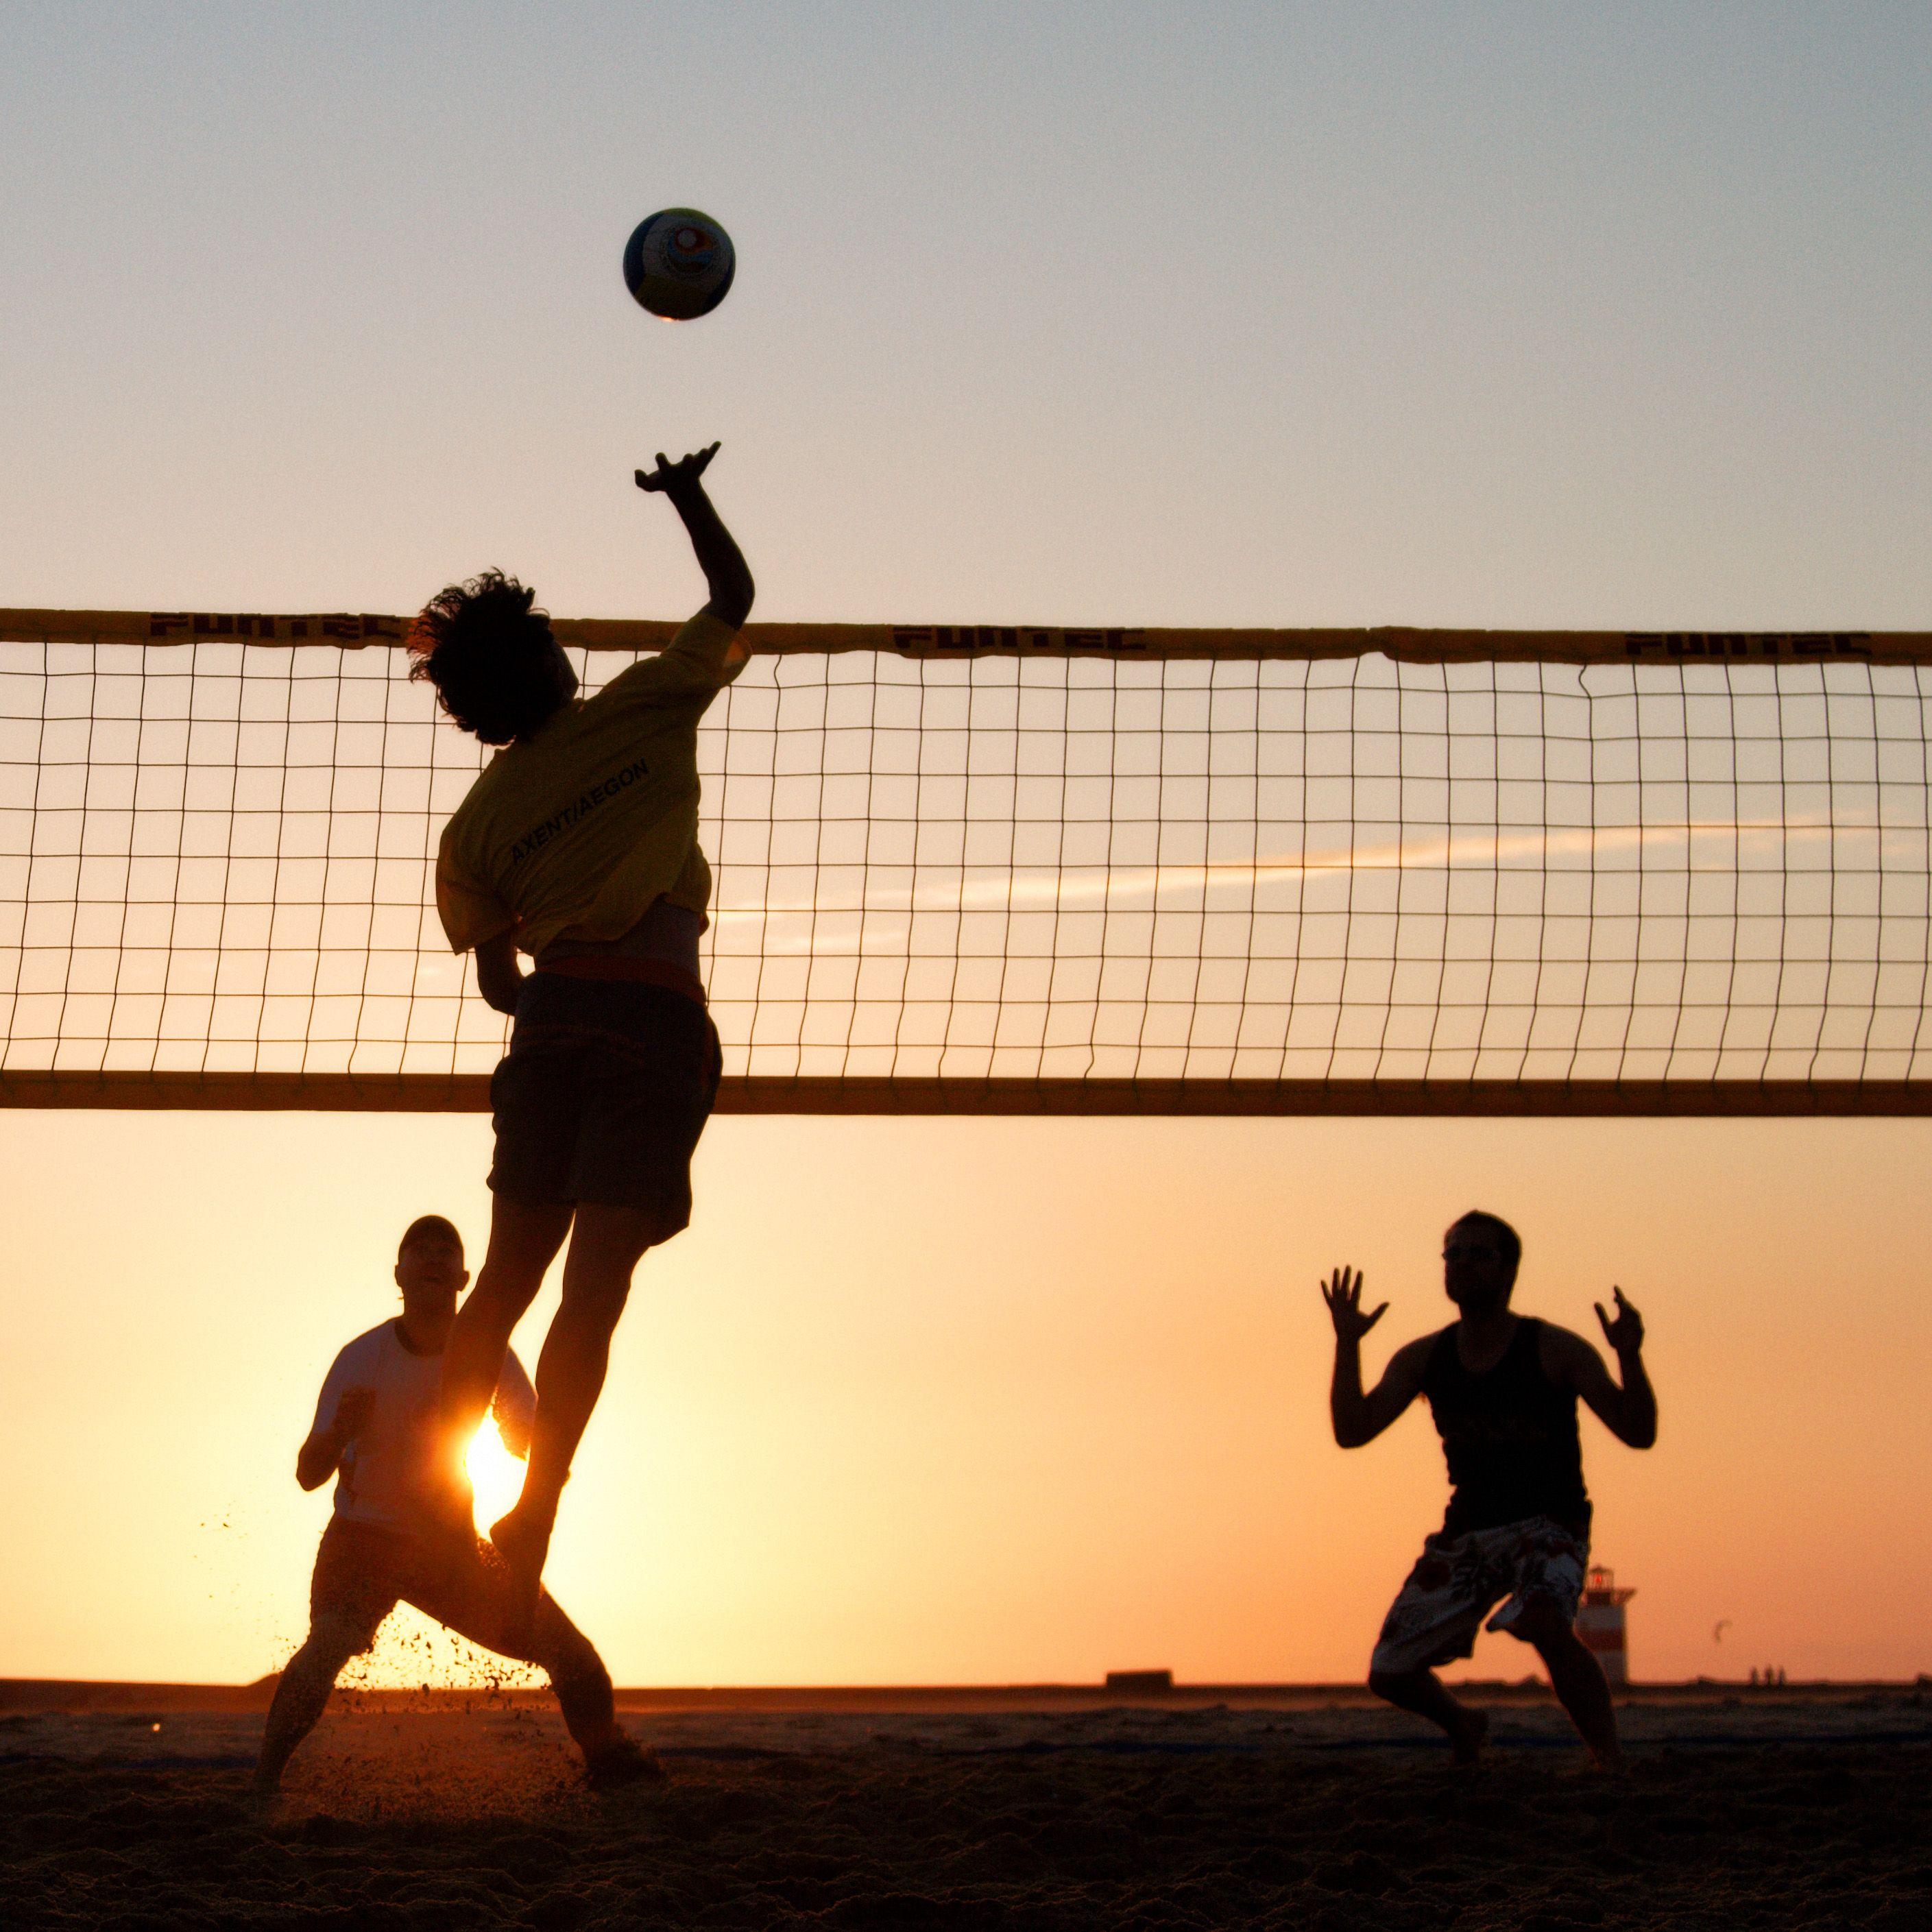 LED Lighting for Volleyball Courts—Money in Your Association's Pocket